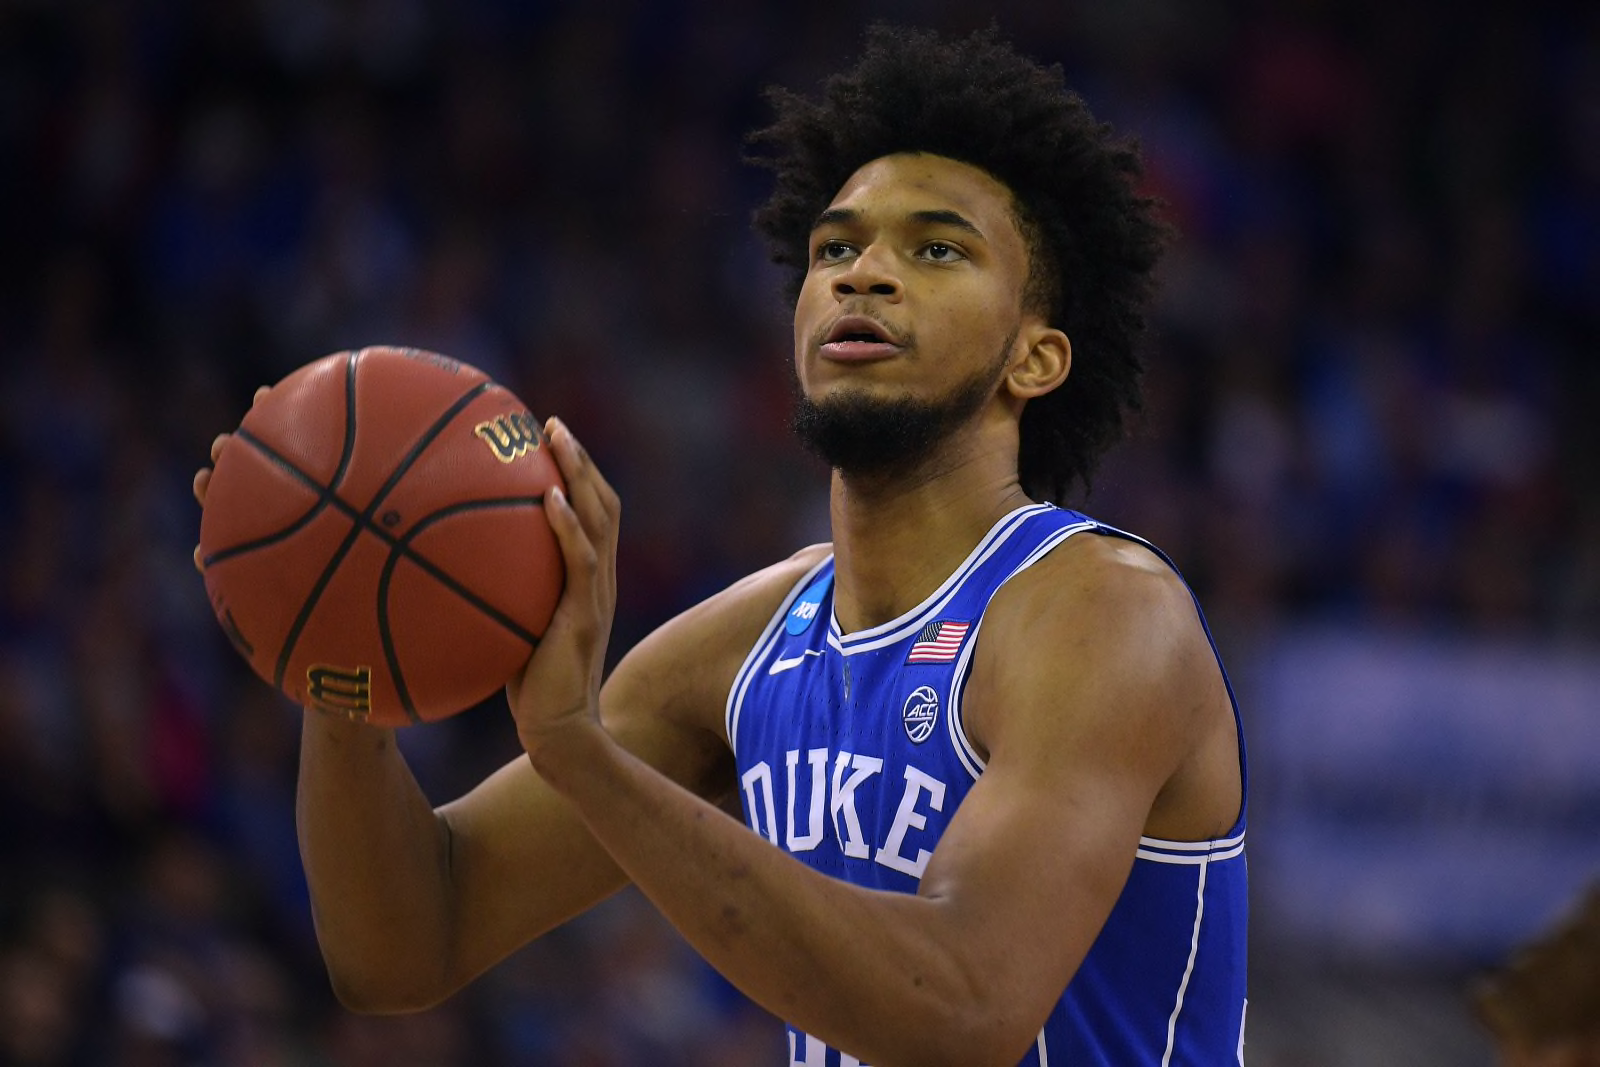 Recruiting: Is Marvin Bagley III the best player in high school hoops?